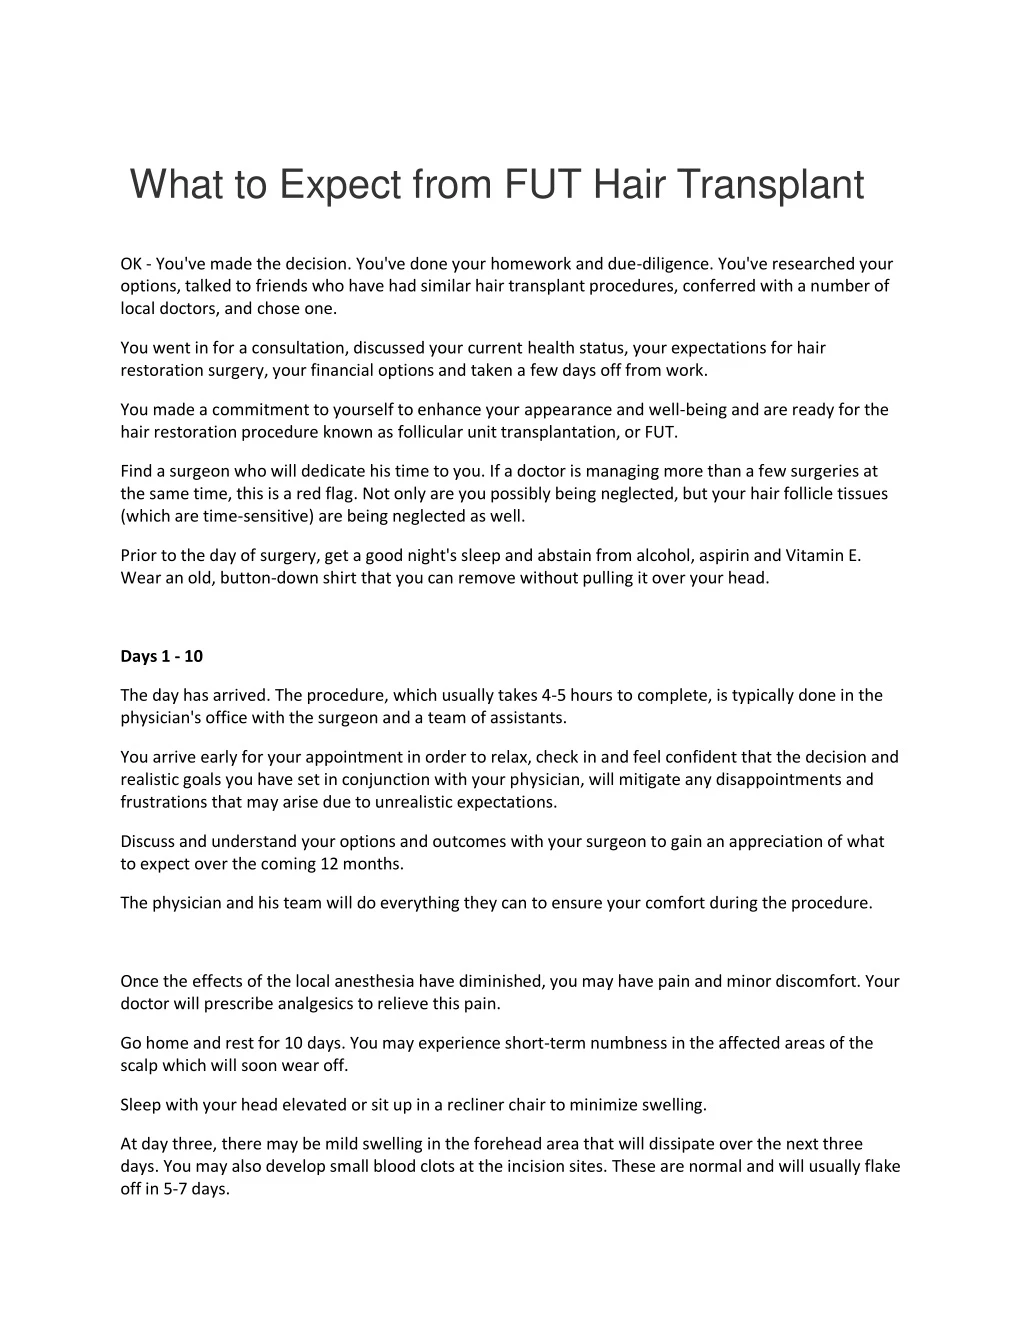 what to expect from fut hair transplant